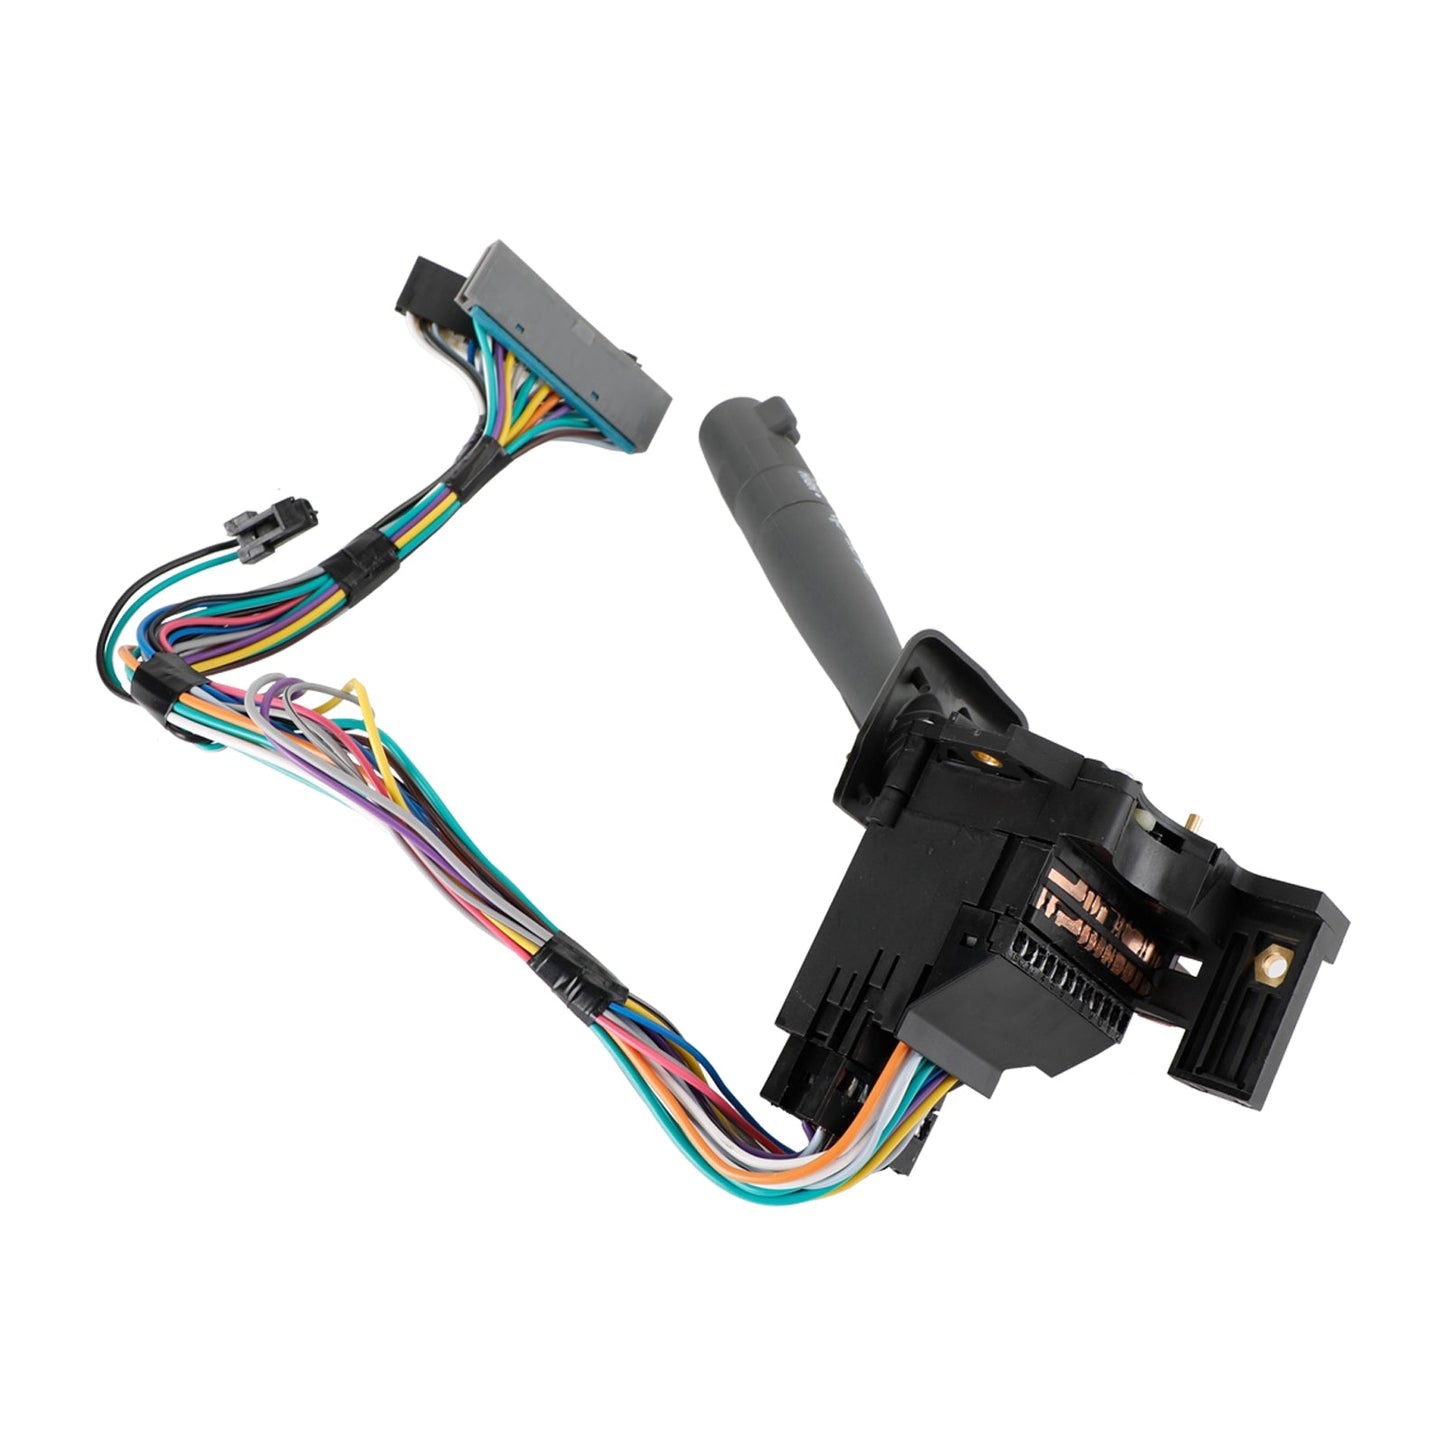 Turn Signal Switch for Chevy Silverado 99-02 Truck Multifunction Wiper Arm Lever